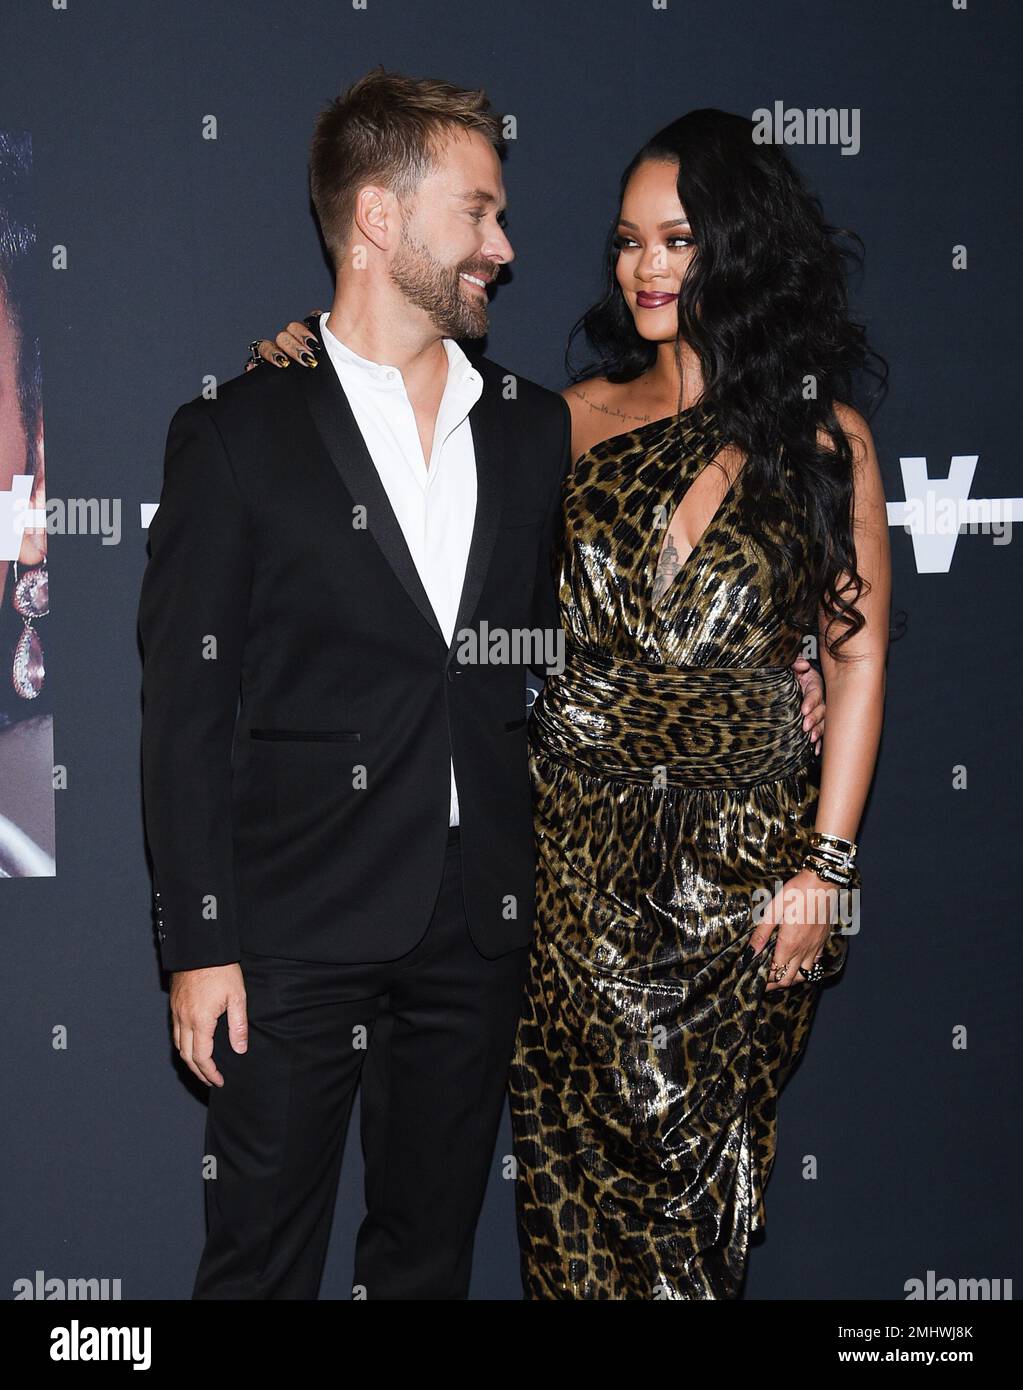 Singer and fashion designer Rihanna attends the Rihanna book launch event  at the Guggenheim Museum on Friday, Oct. 11, 2019, in New York. (Photo by  Evan Agostini/Invision/AP Stock Photo - Alamy